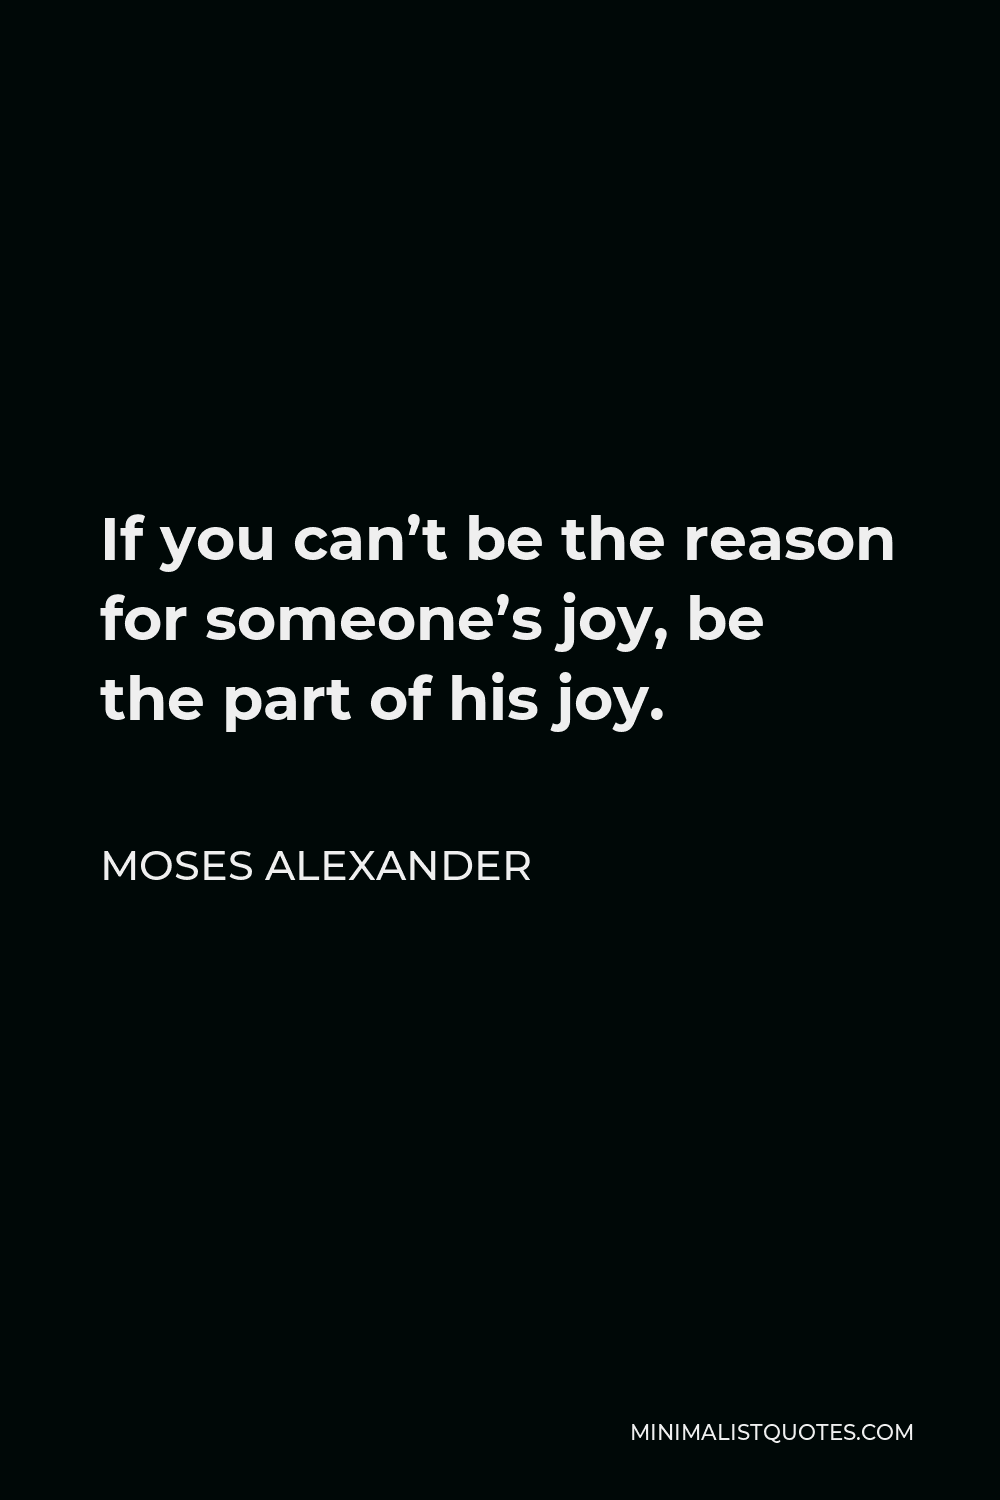 Moses Alexander Quote - If you can’t be the reason for someone’s joy, be the part of his joy.